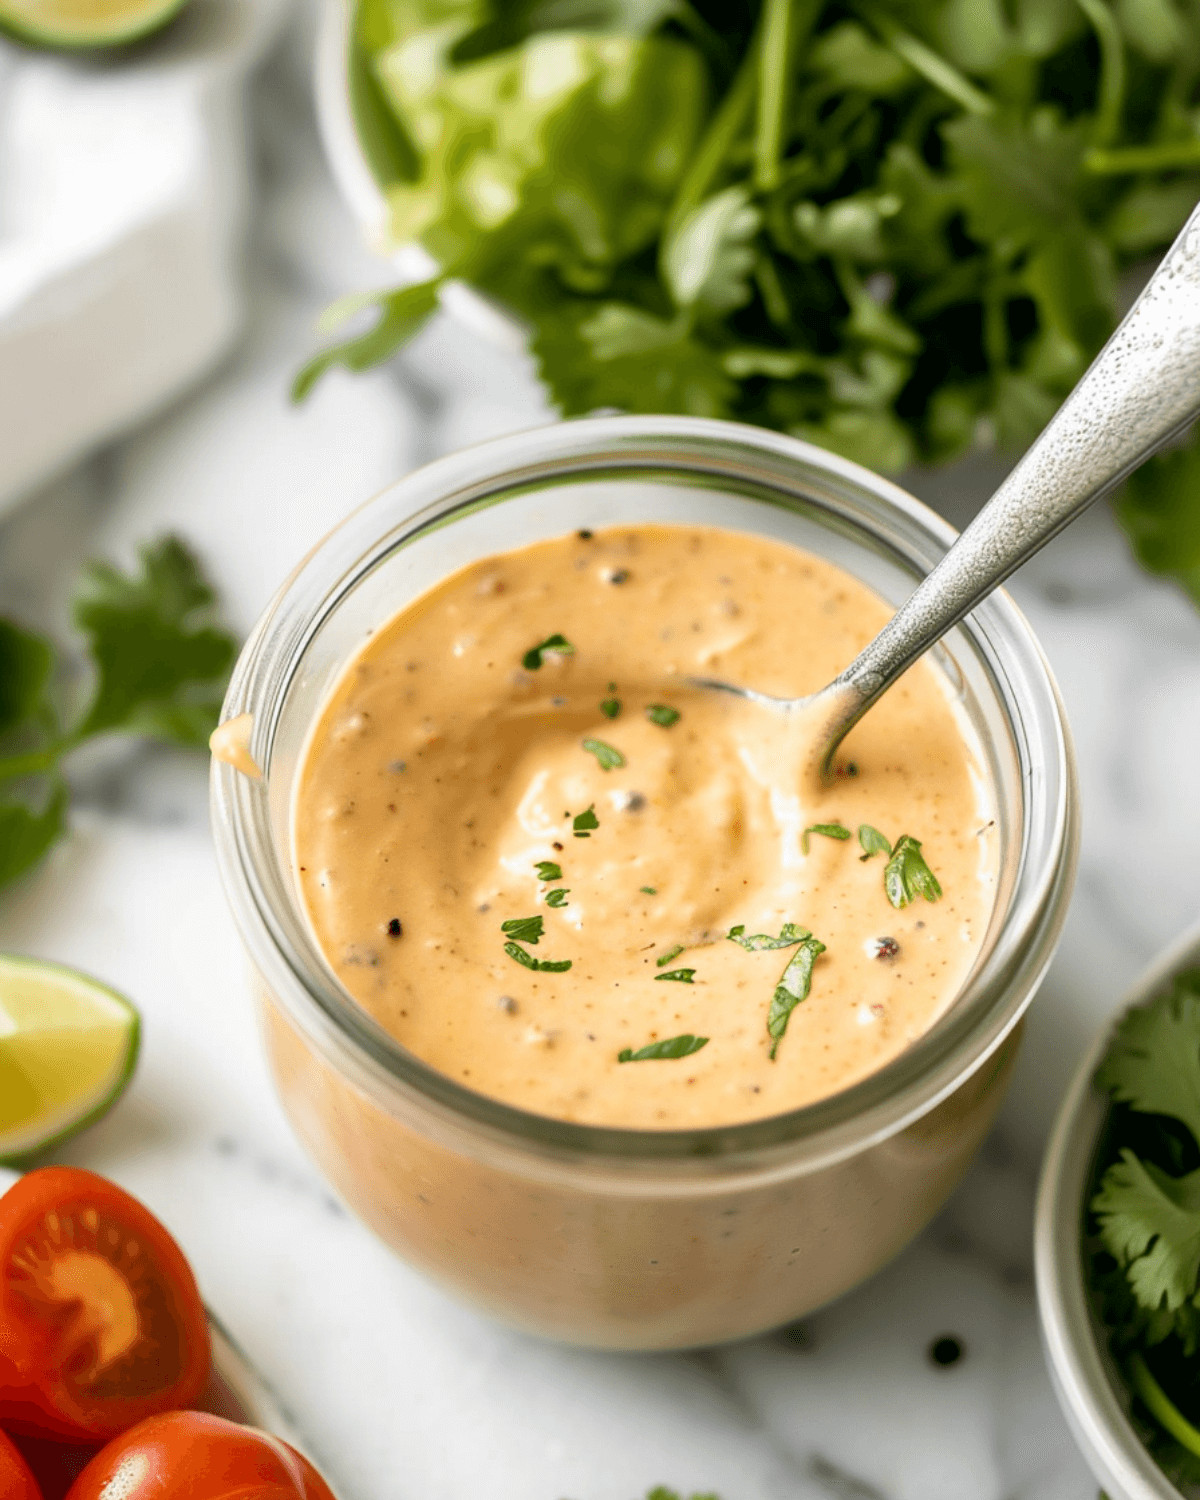 A spoon in the jar of the chipotle ranch dressing.